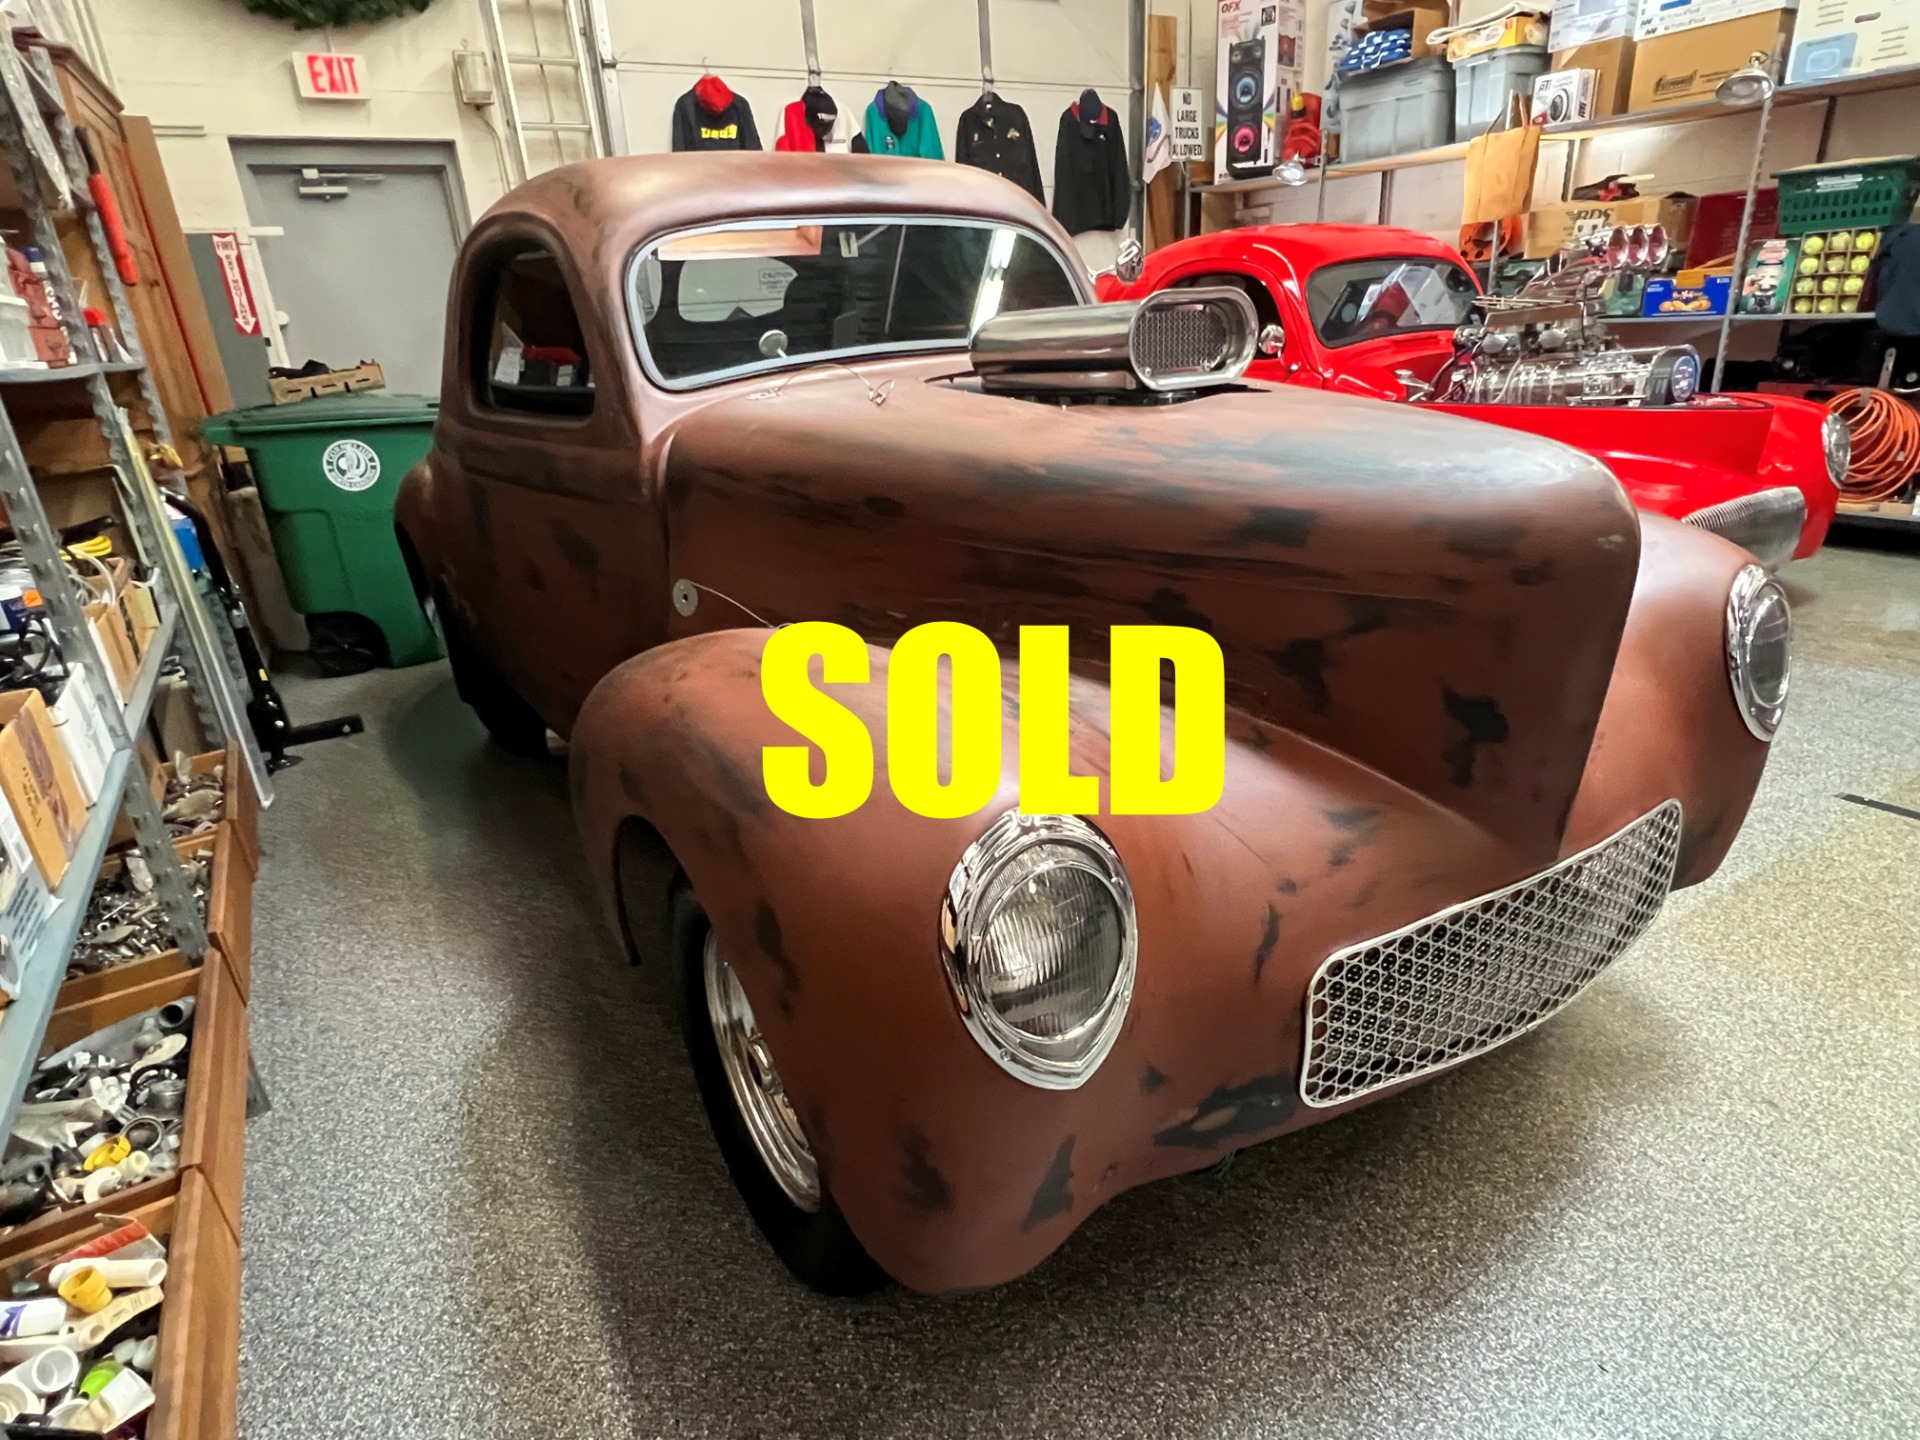 Used 1941 Willys Coupe  259 , For Sale $32000, Call Us: (704) 996-3735